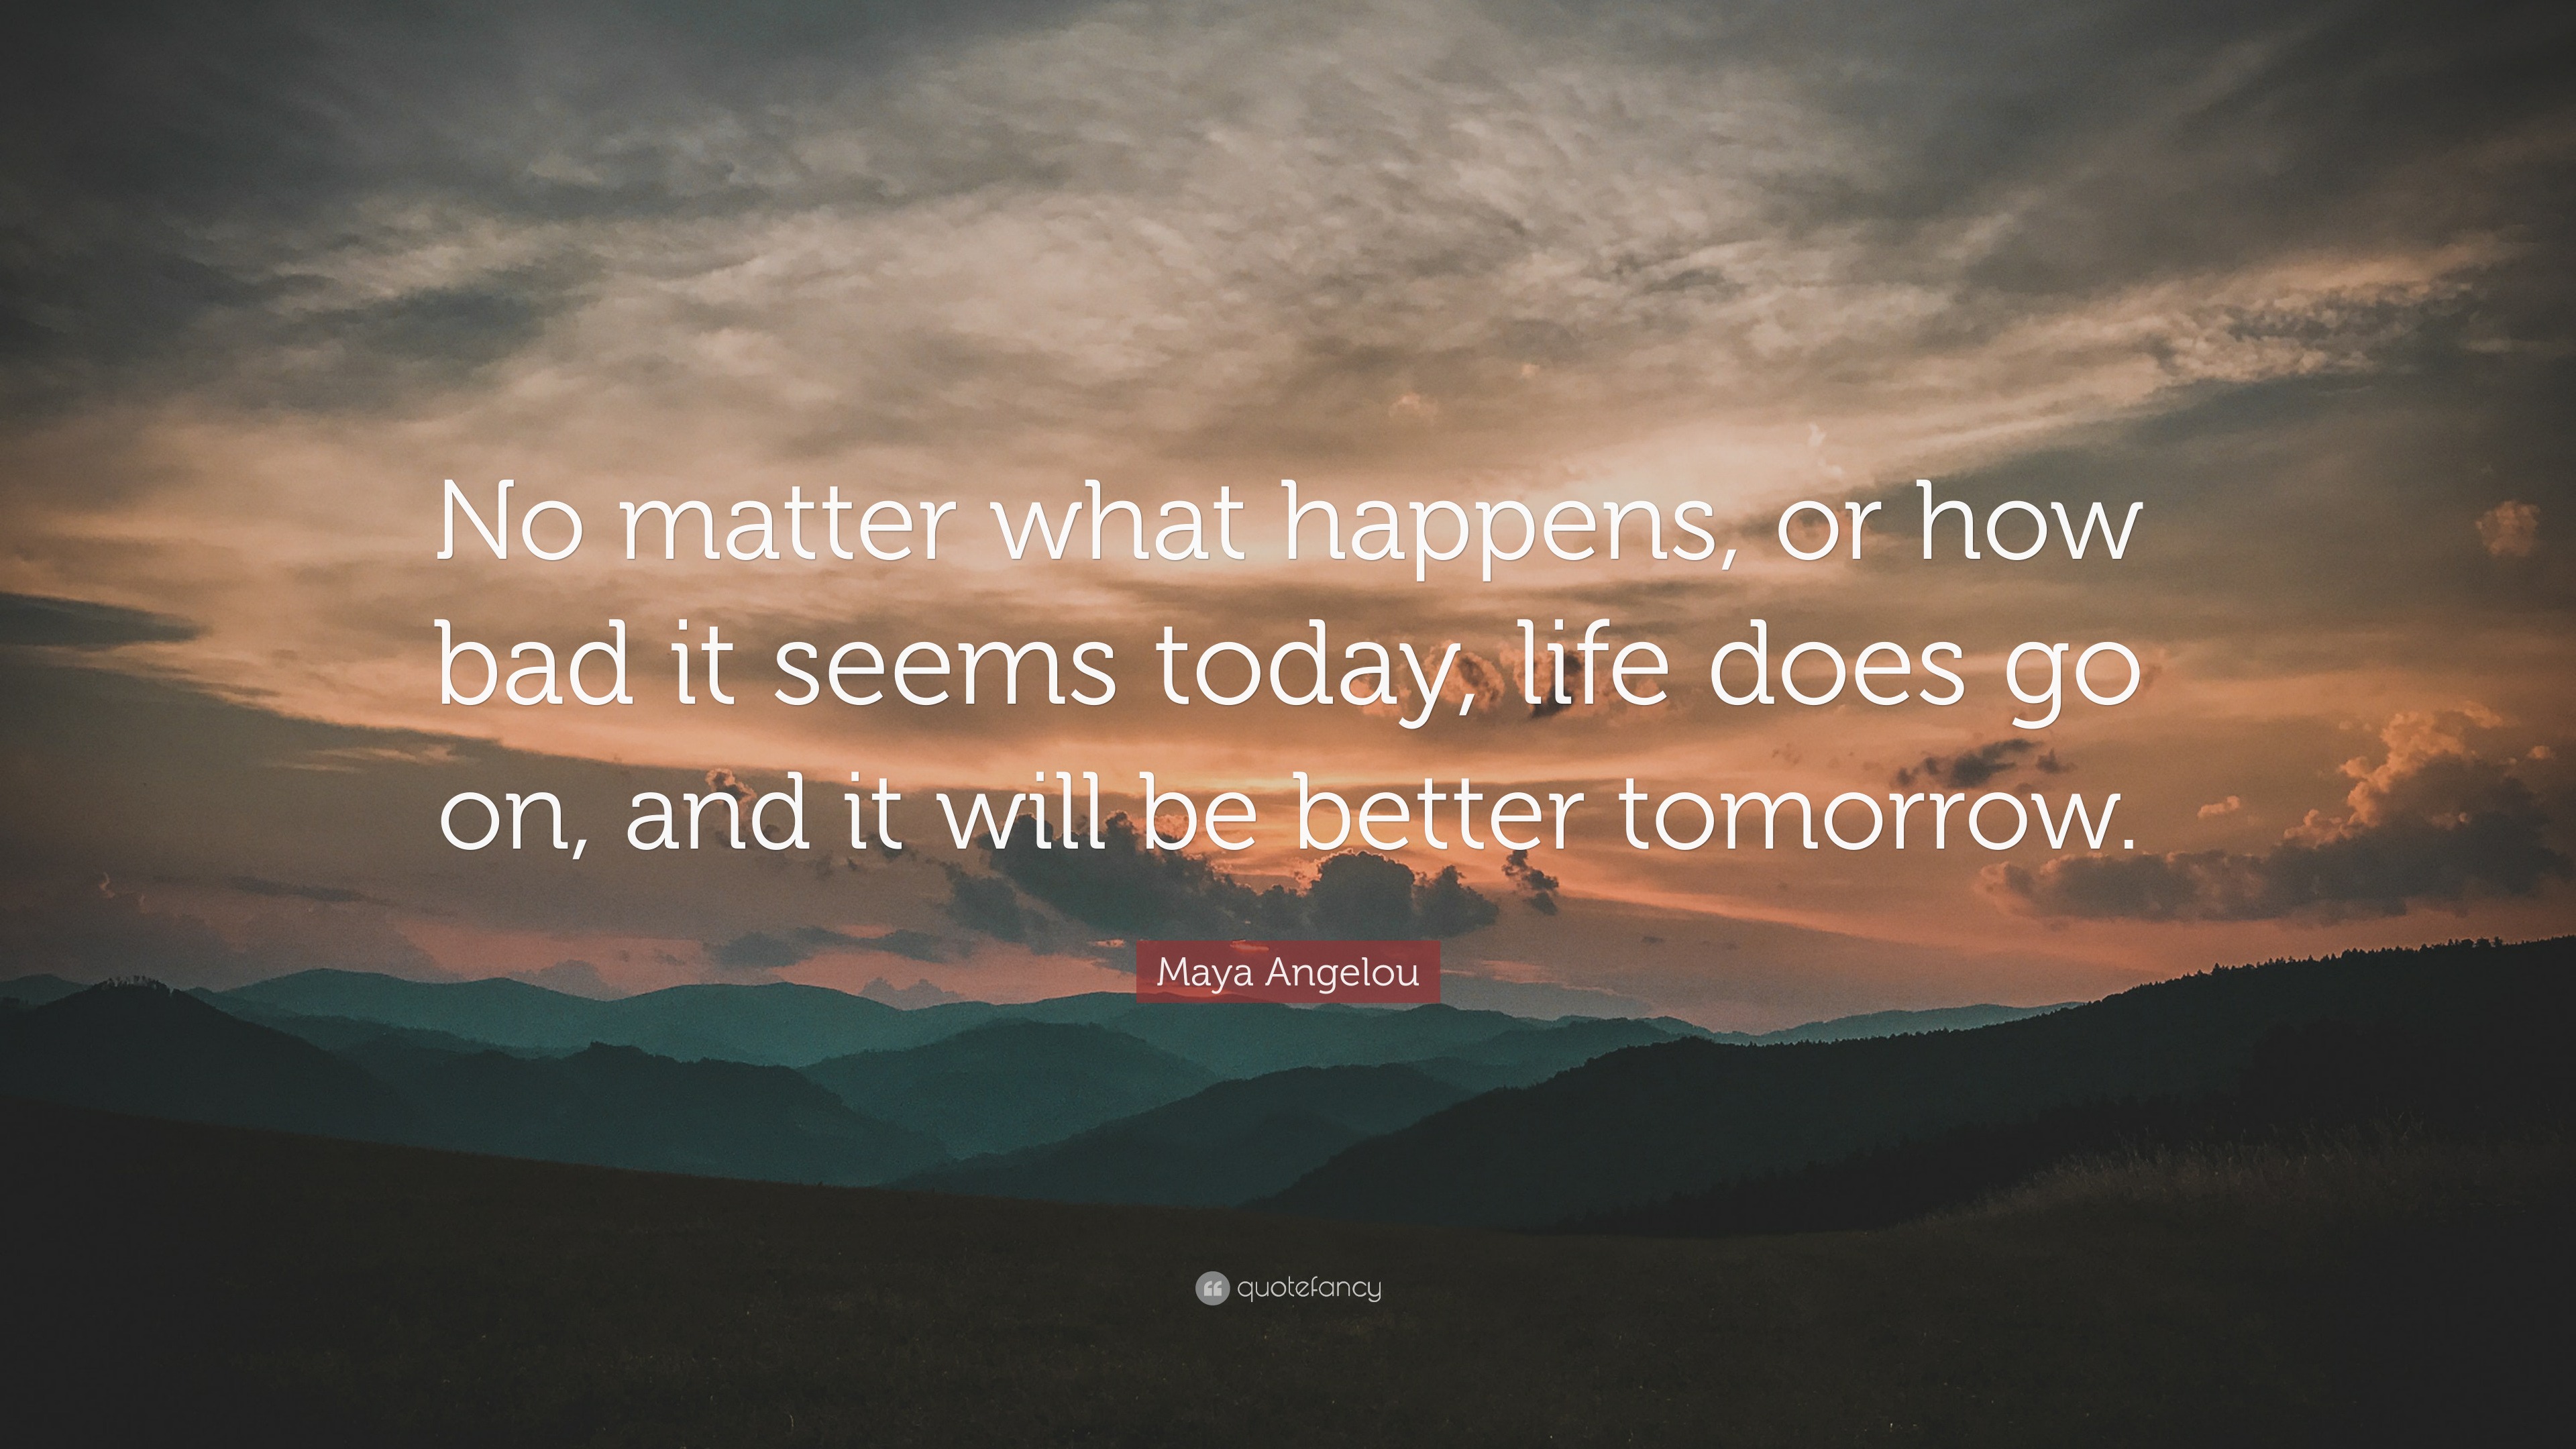 Maya Angelou Quote No Matter What Happens Or How Bad It Seems Today Life Does Go